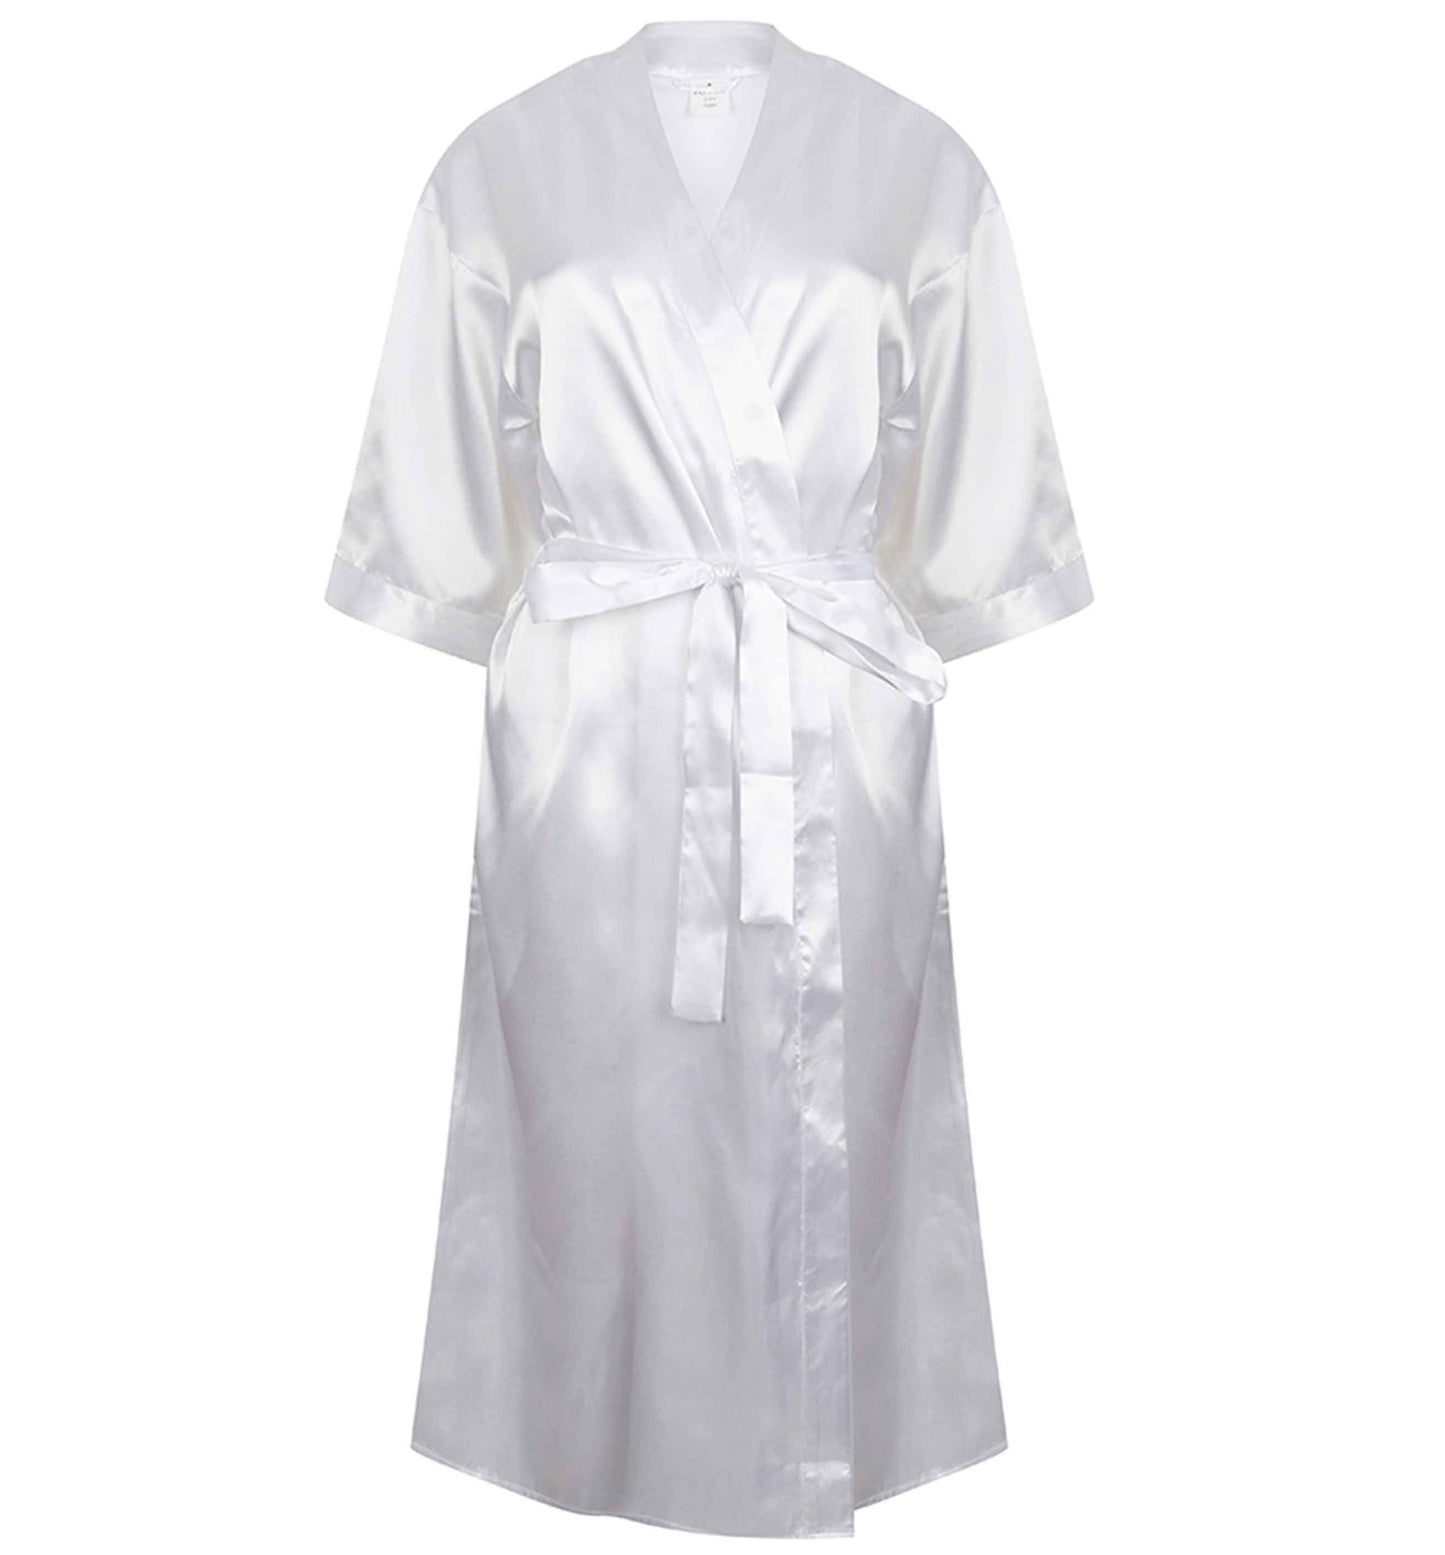 Willy straws and dirty dance floors | 8-18 | Kimono style satin robe | Ladies dressing gown